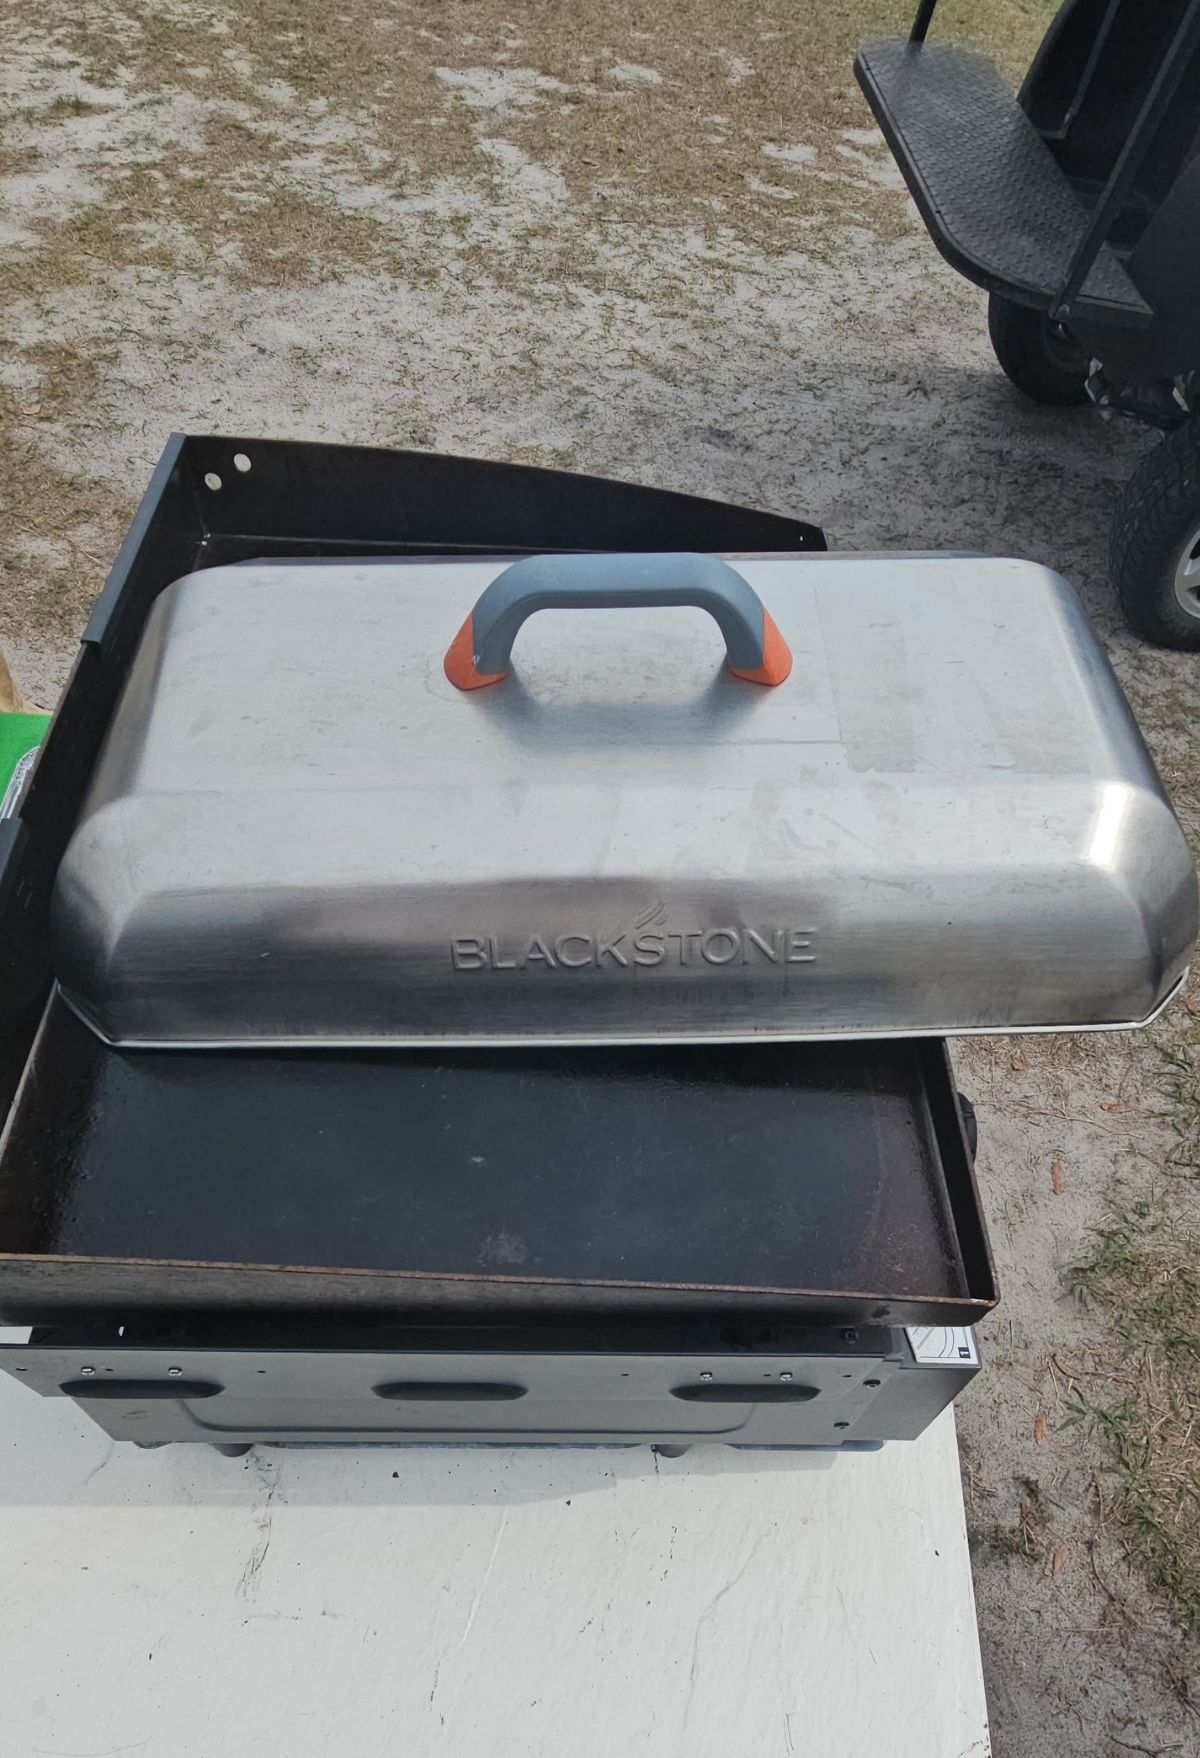 A blackstone griddle with an open lid, placed outdoors.